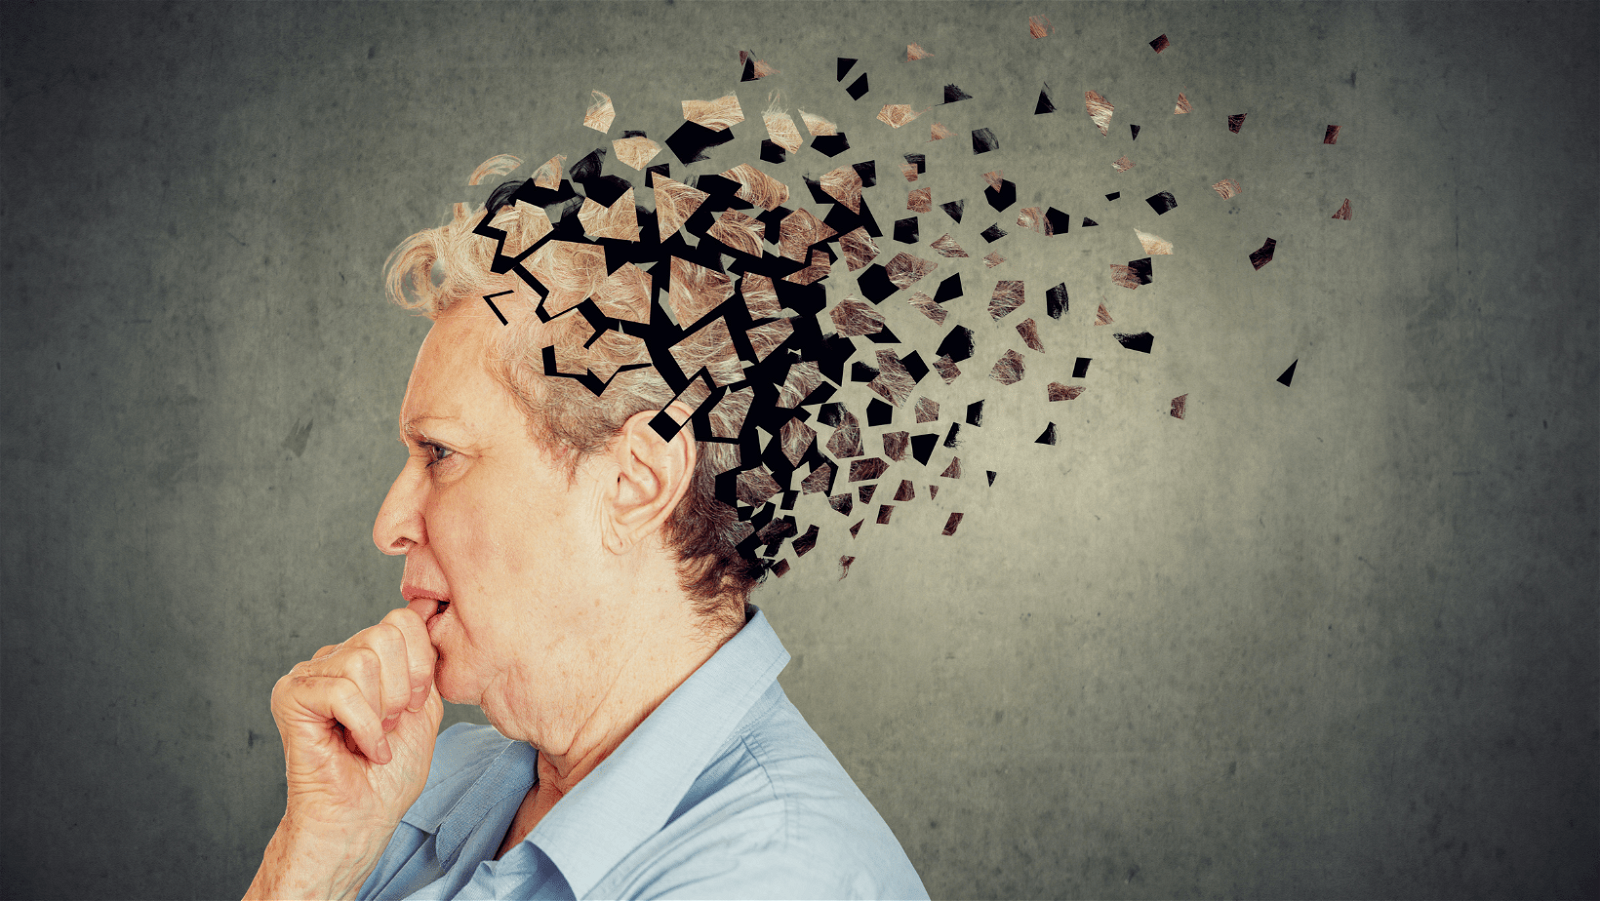 Dementia is the second-leading cause of death in Australians aged 75-84.